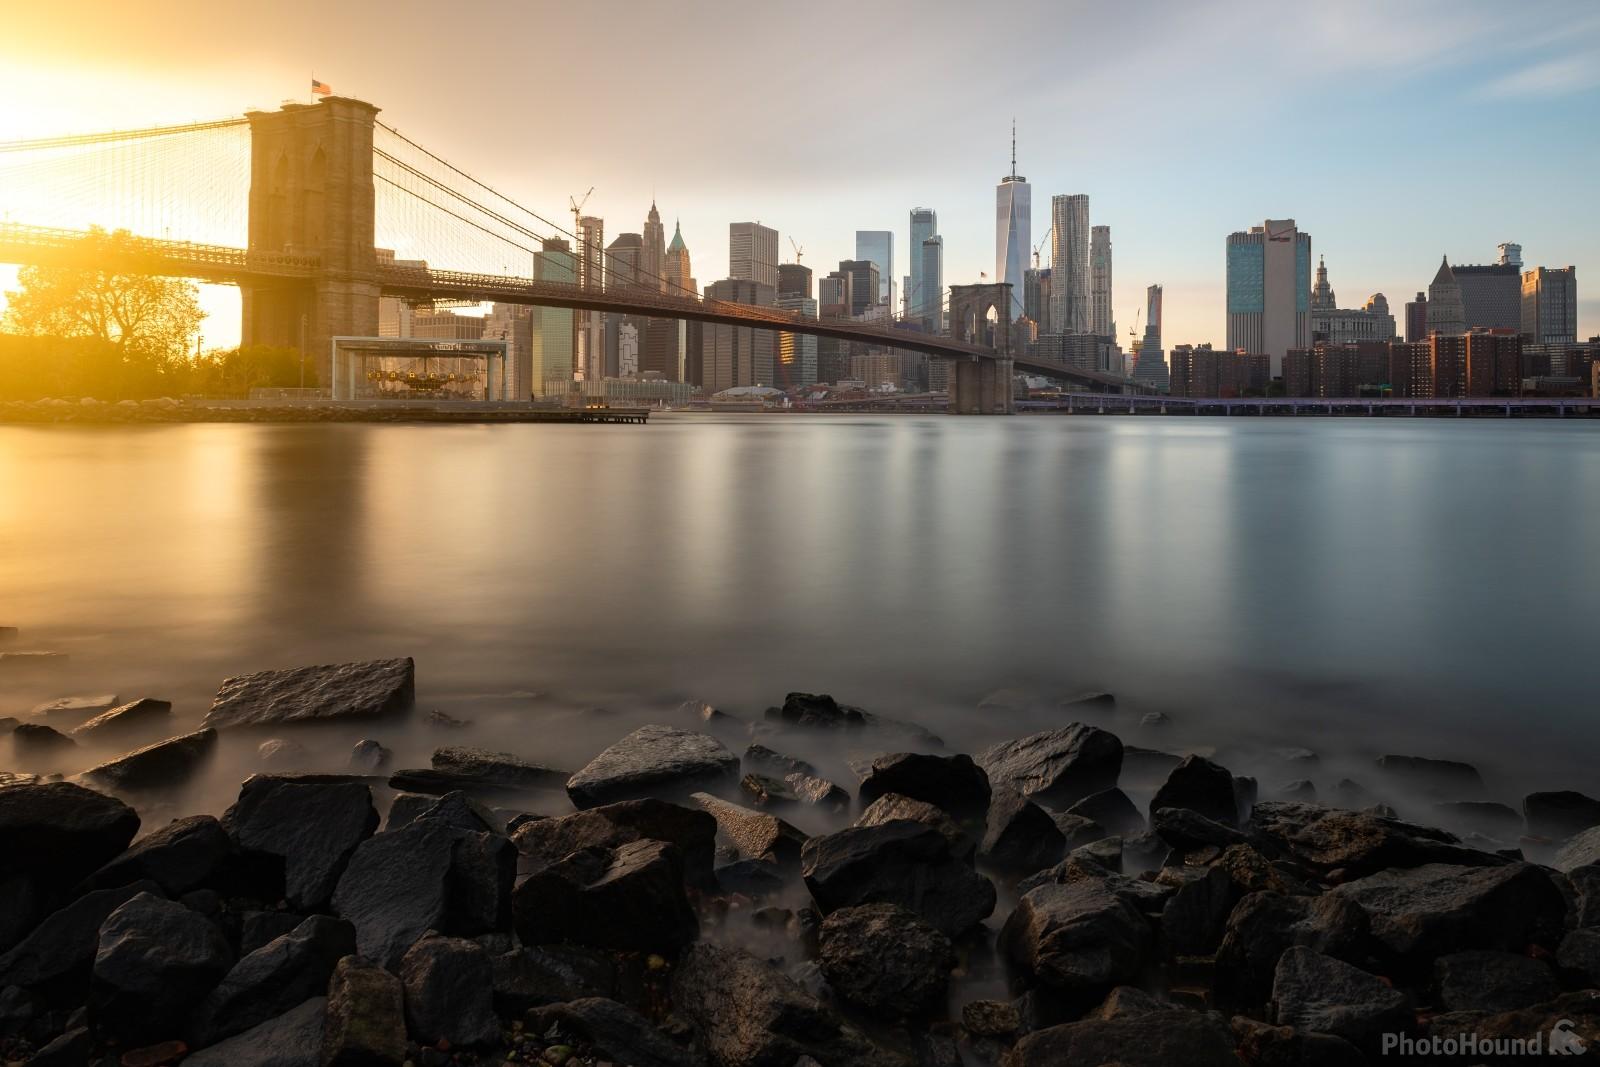 Image of Lower Manhattan from Dumbo by VOJTa Herout